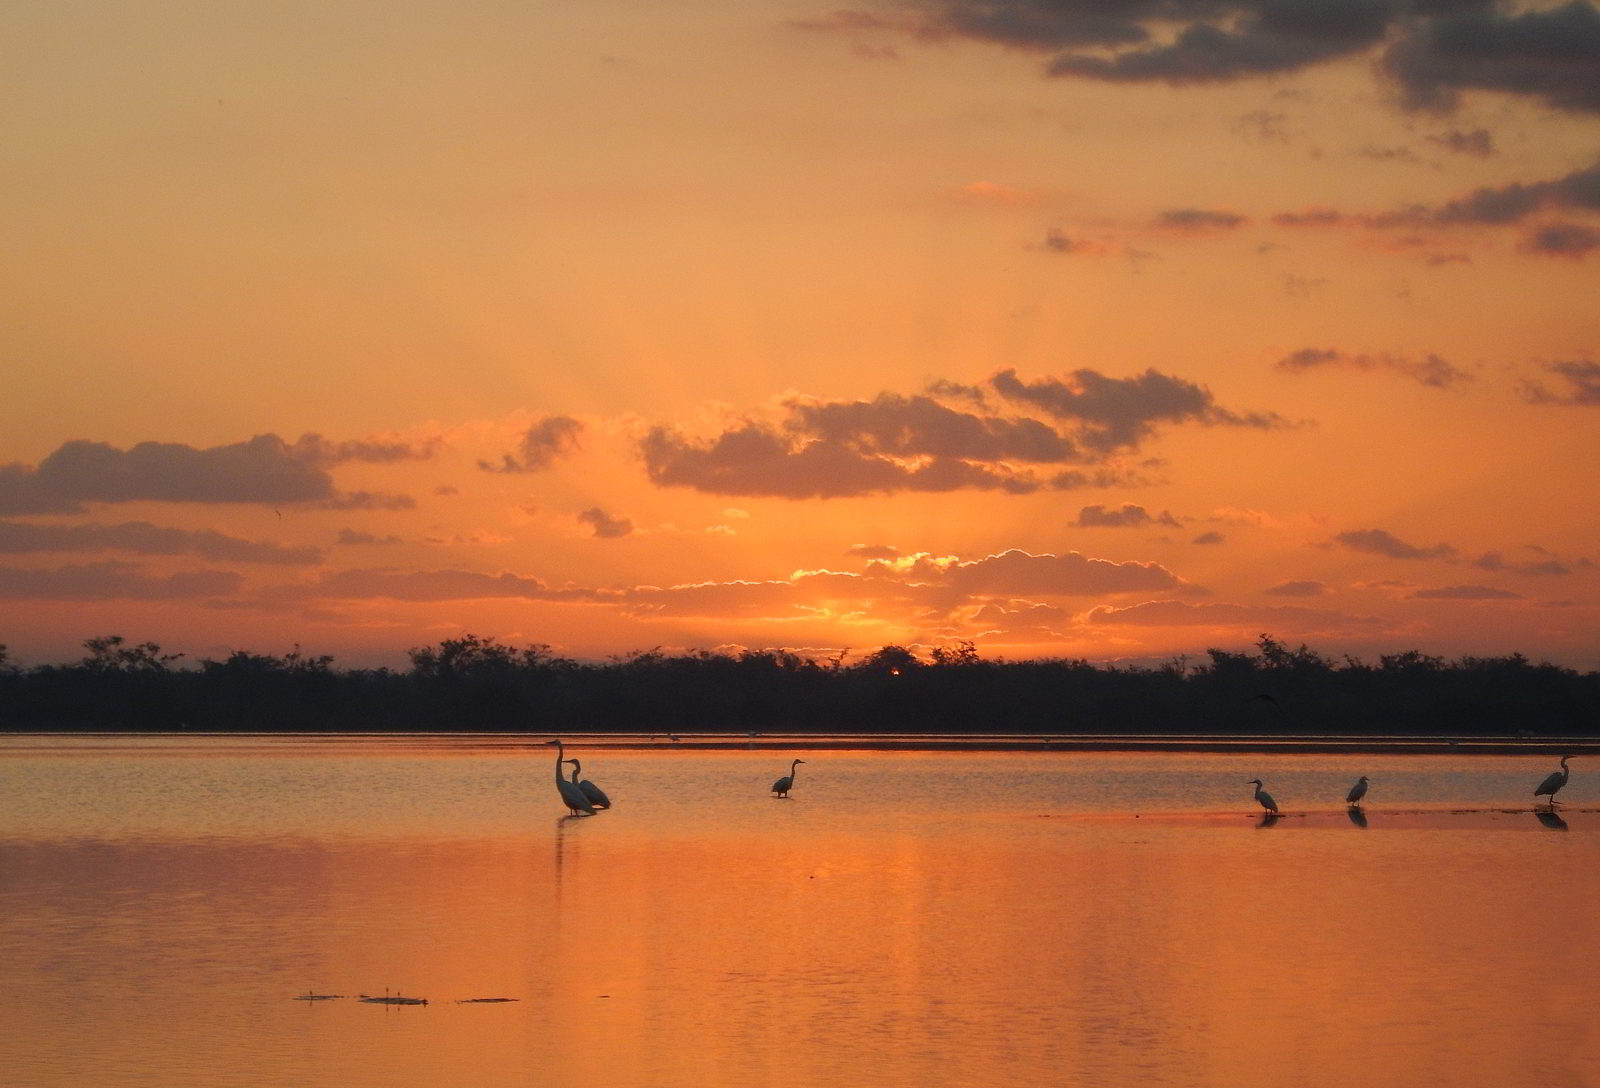 An image of an orange sunrise over the bird-filled lagoon at Crooked Tree Wildlife Sanctuary in Belize